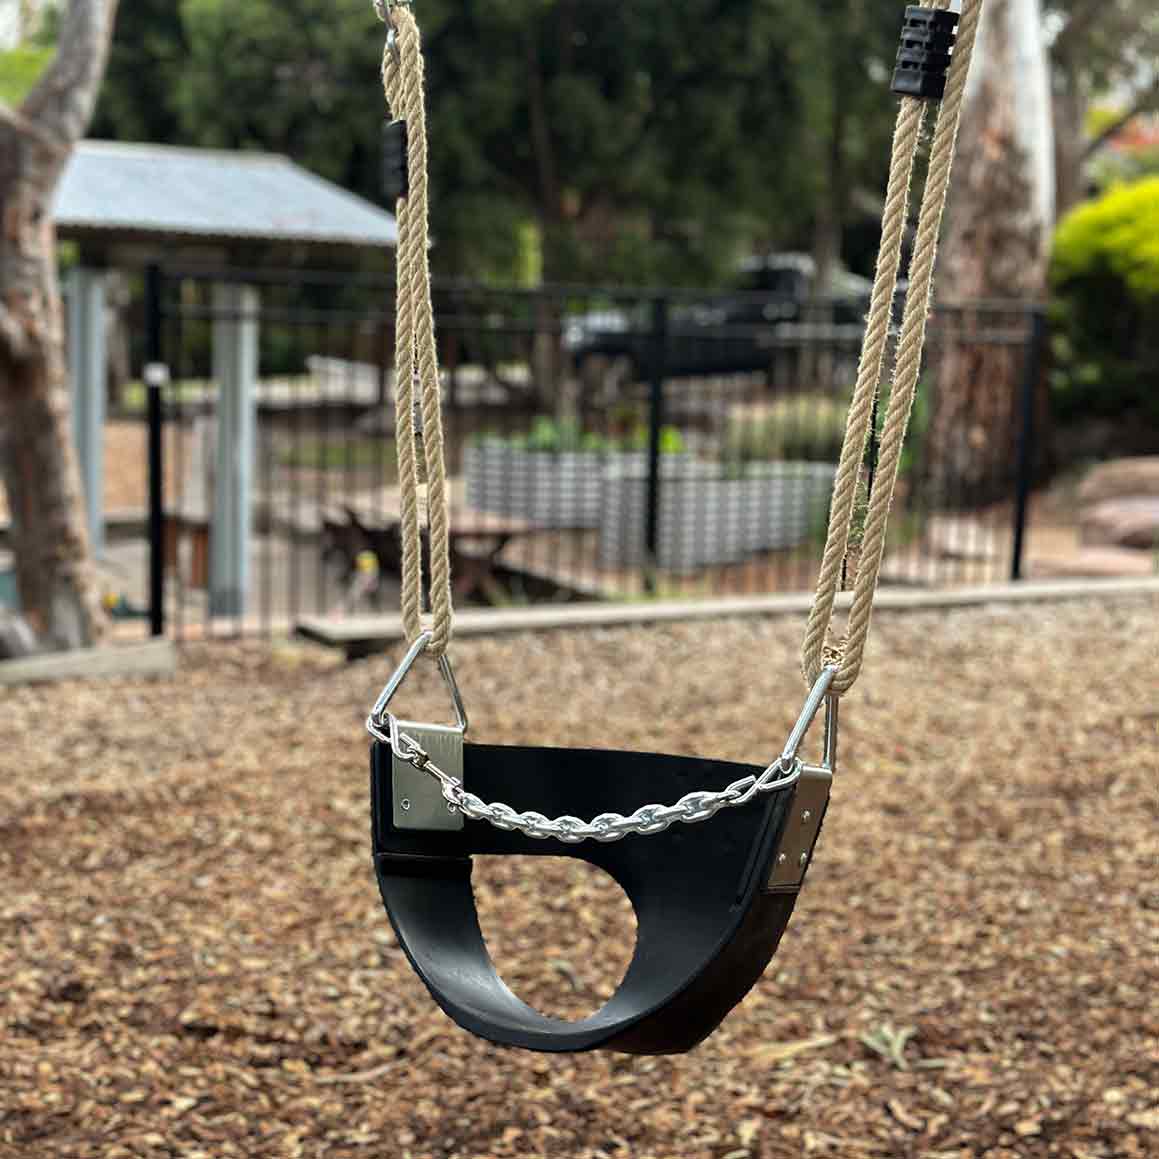 Wooden bucket seat for Timber swing sets. Made in Australia. 